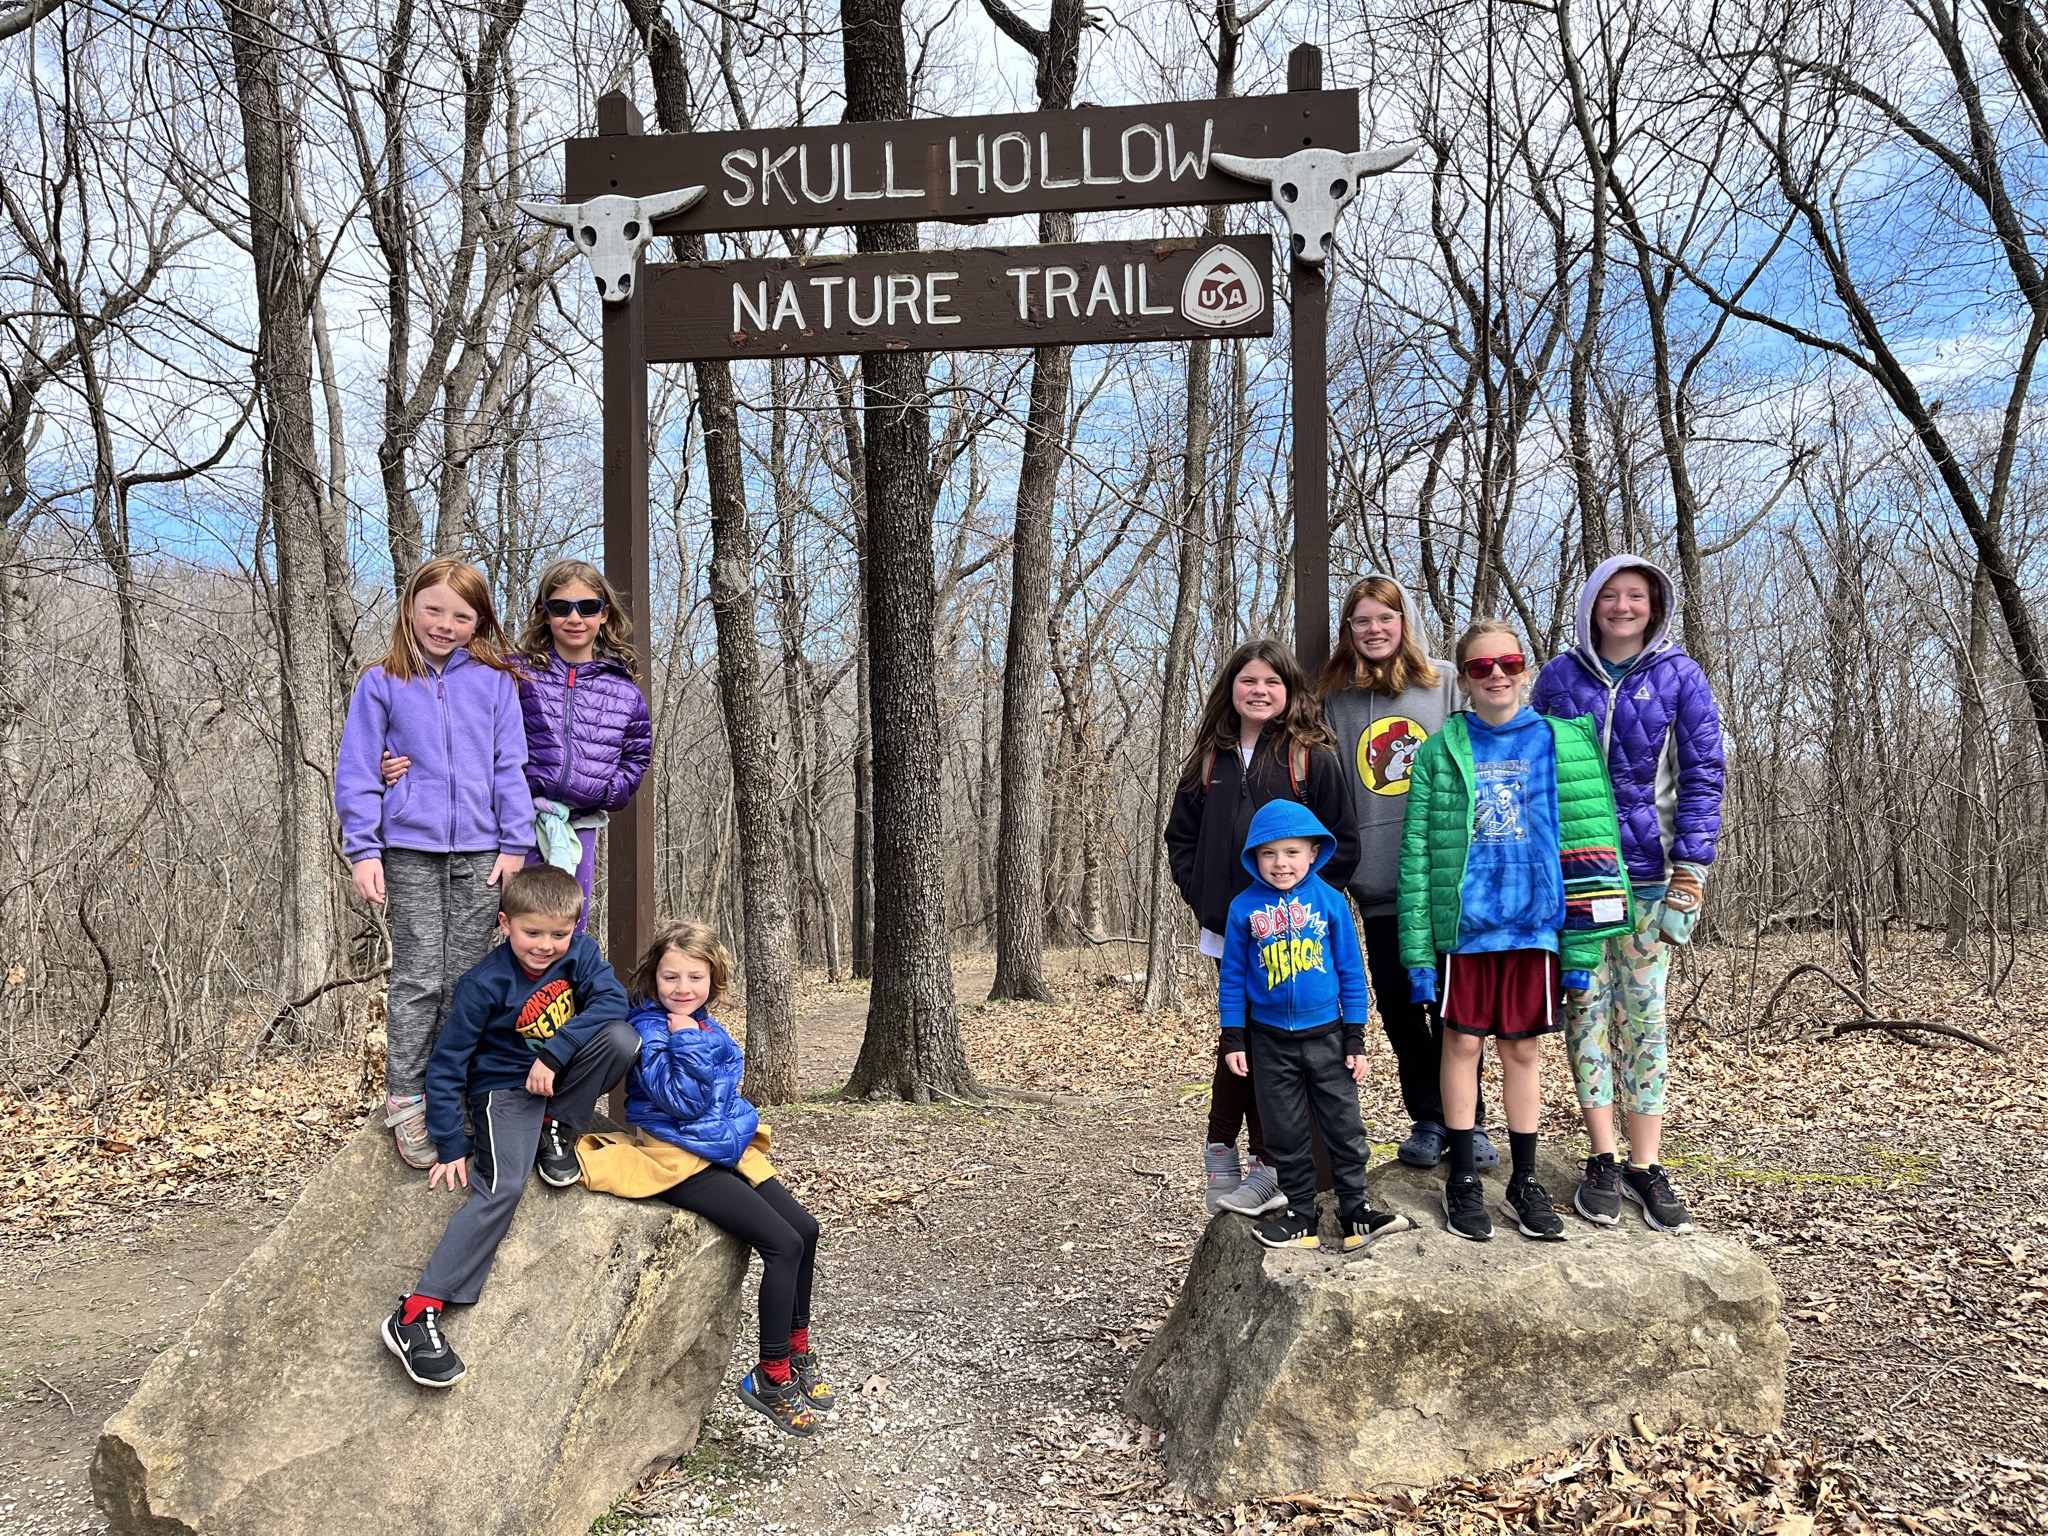 A photo of Nora, Ainsley, Peter, Grayson, Molly, Oliver, Kate, Dillon, and Rayleigh standing on rocks wearing coats and sweatshirts outside under a sign that says "Skull Hollow Nature Trail" with a picture of a longhorn cow skull